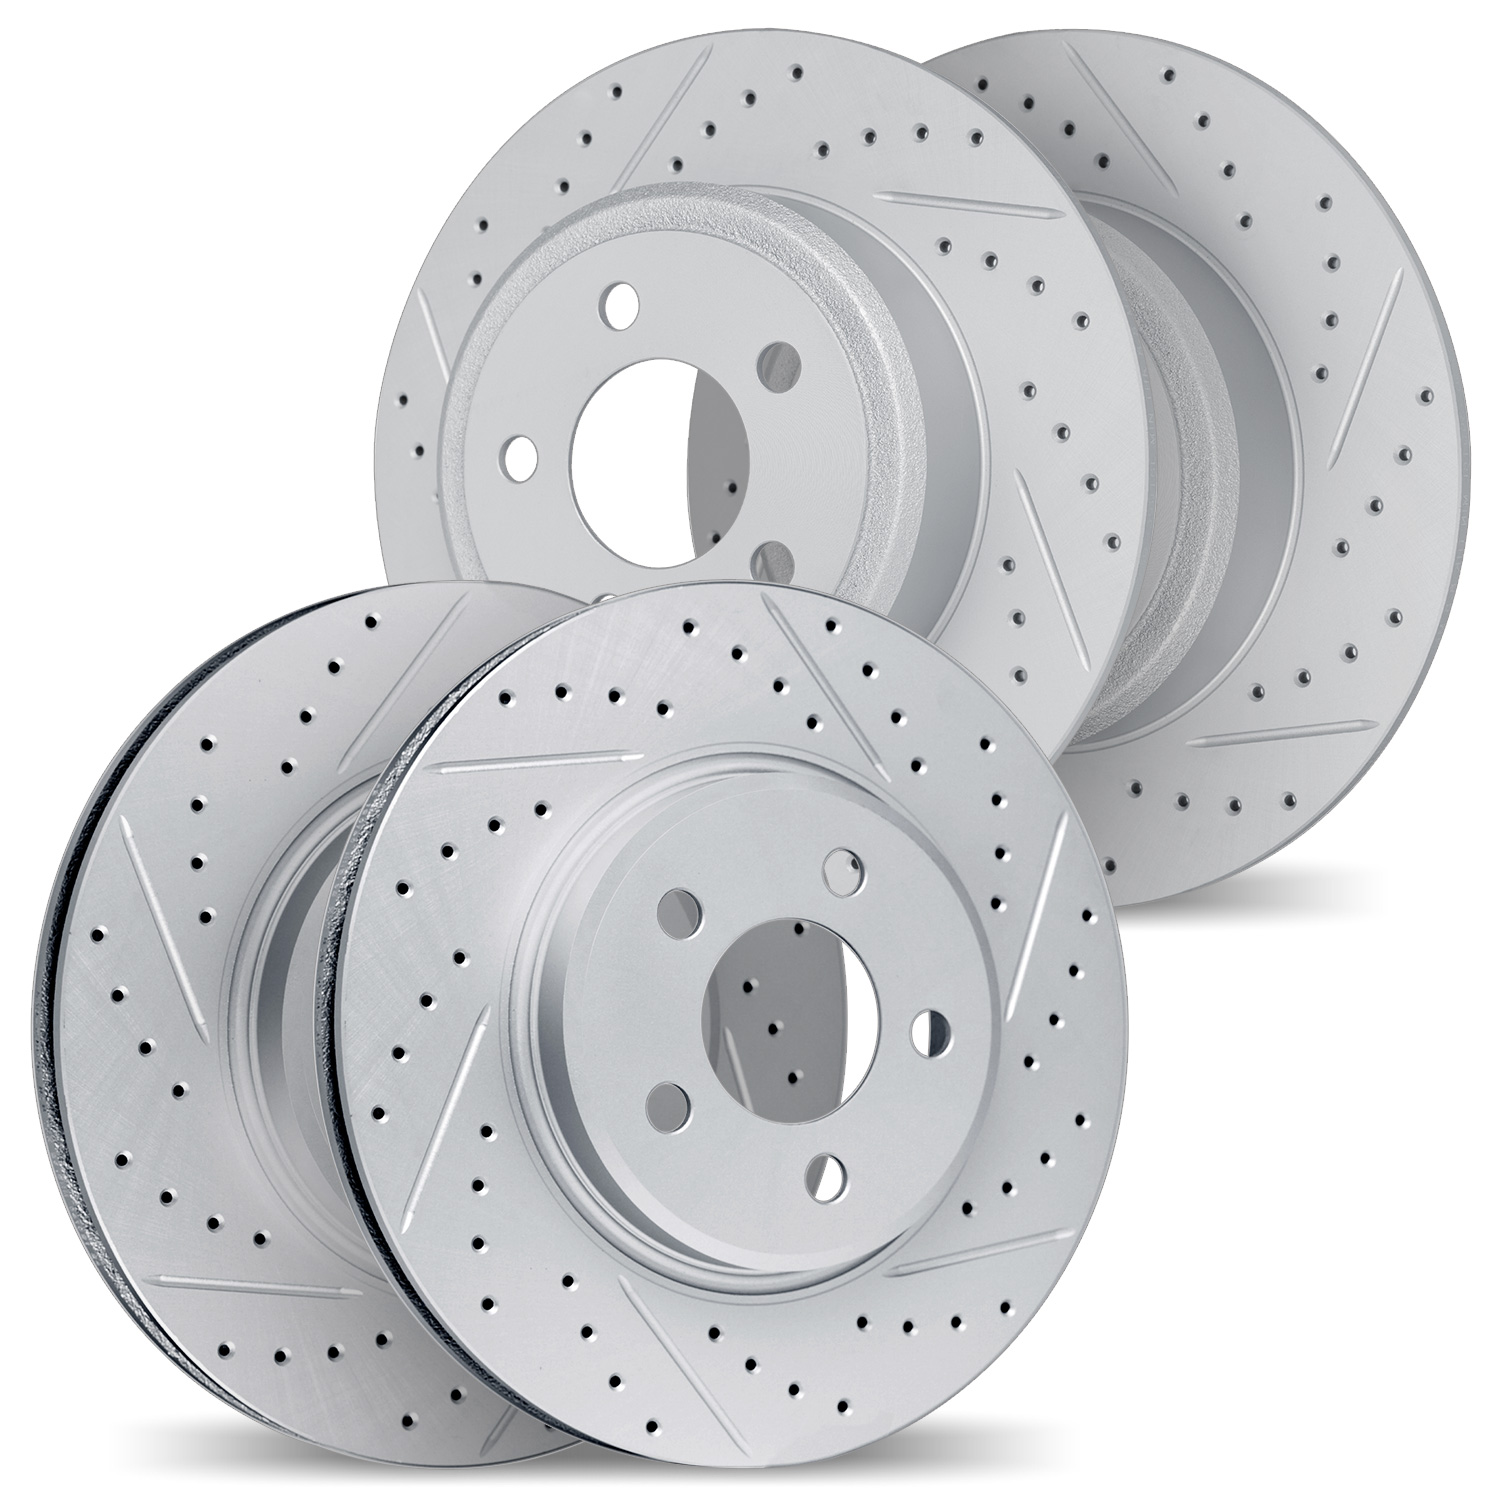 2004-56001 Geoperformance Drilled/Slotted Brake Rotors, 1998-2002 Ford/Lincoln/Mercury/Mazda, Position: Front and Rear